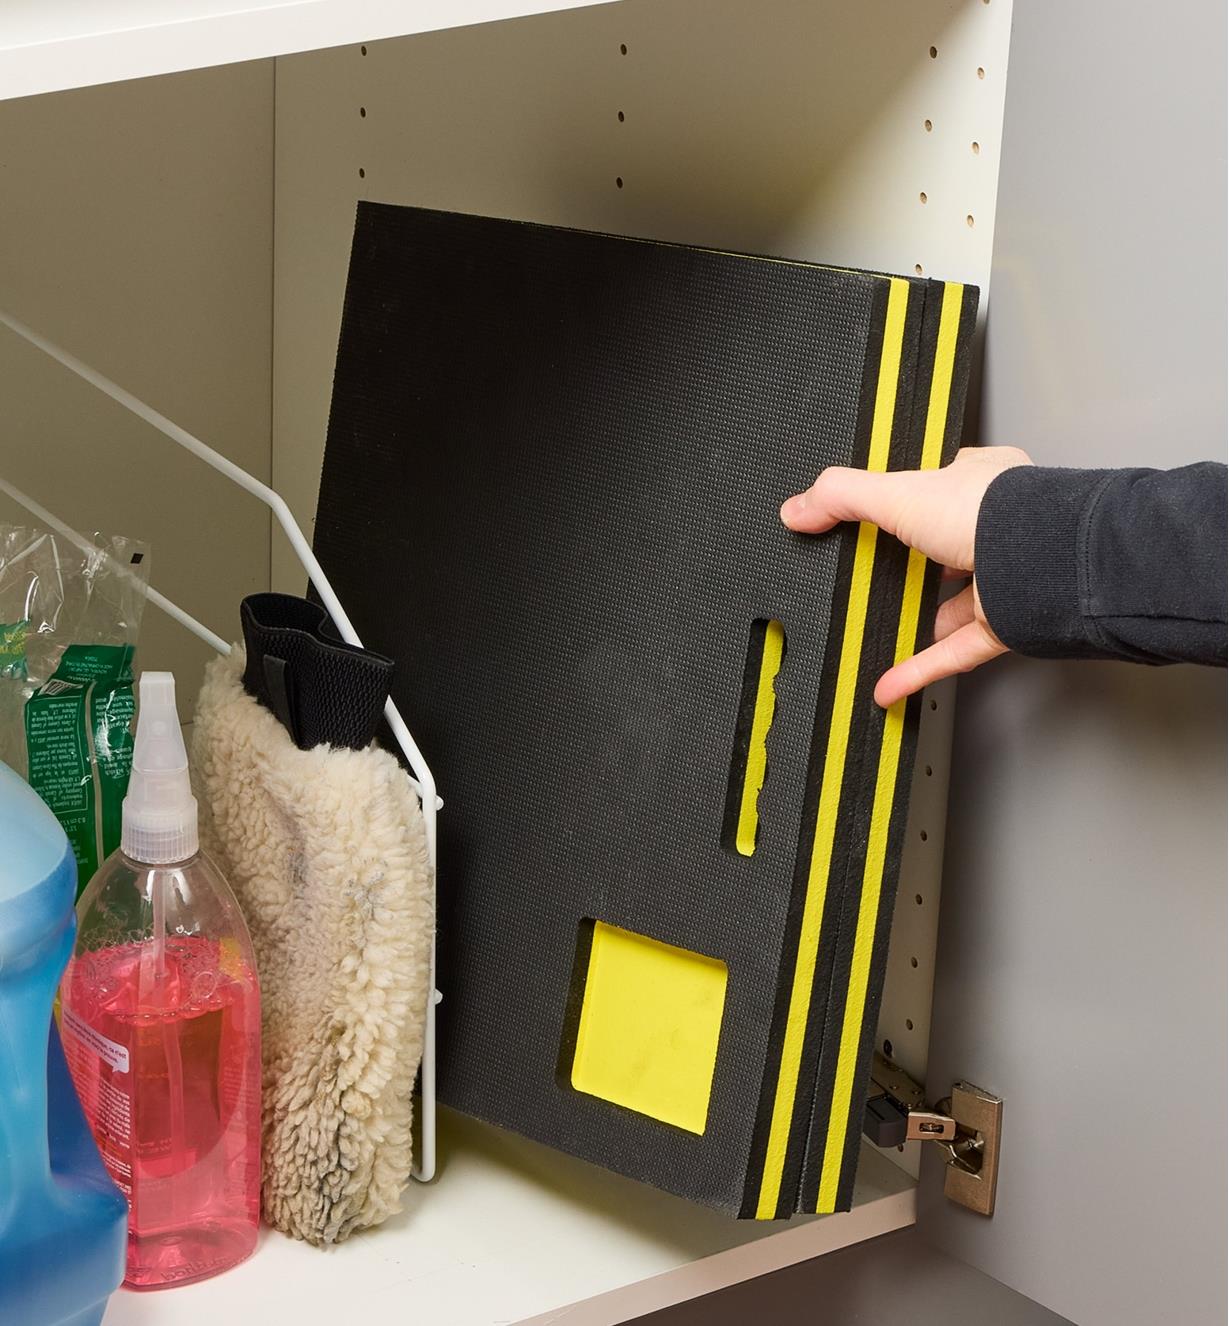 Reaching for a foam kneeler that is folded in half and stored in a cupboard with cleaning supplies